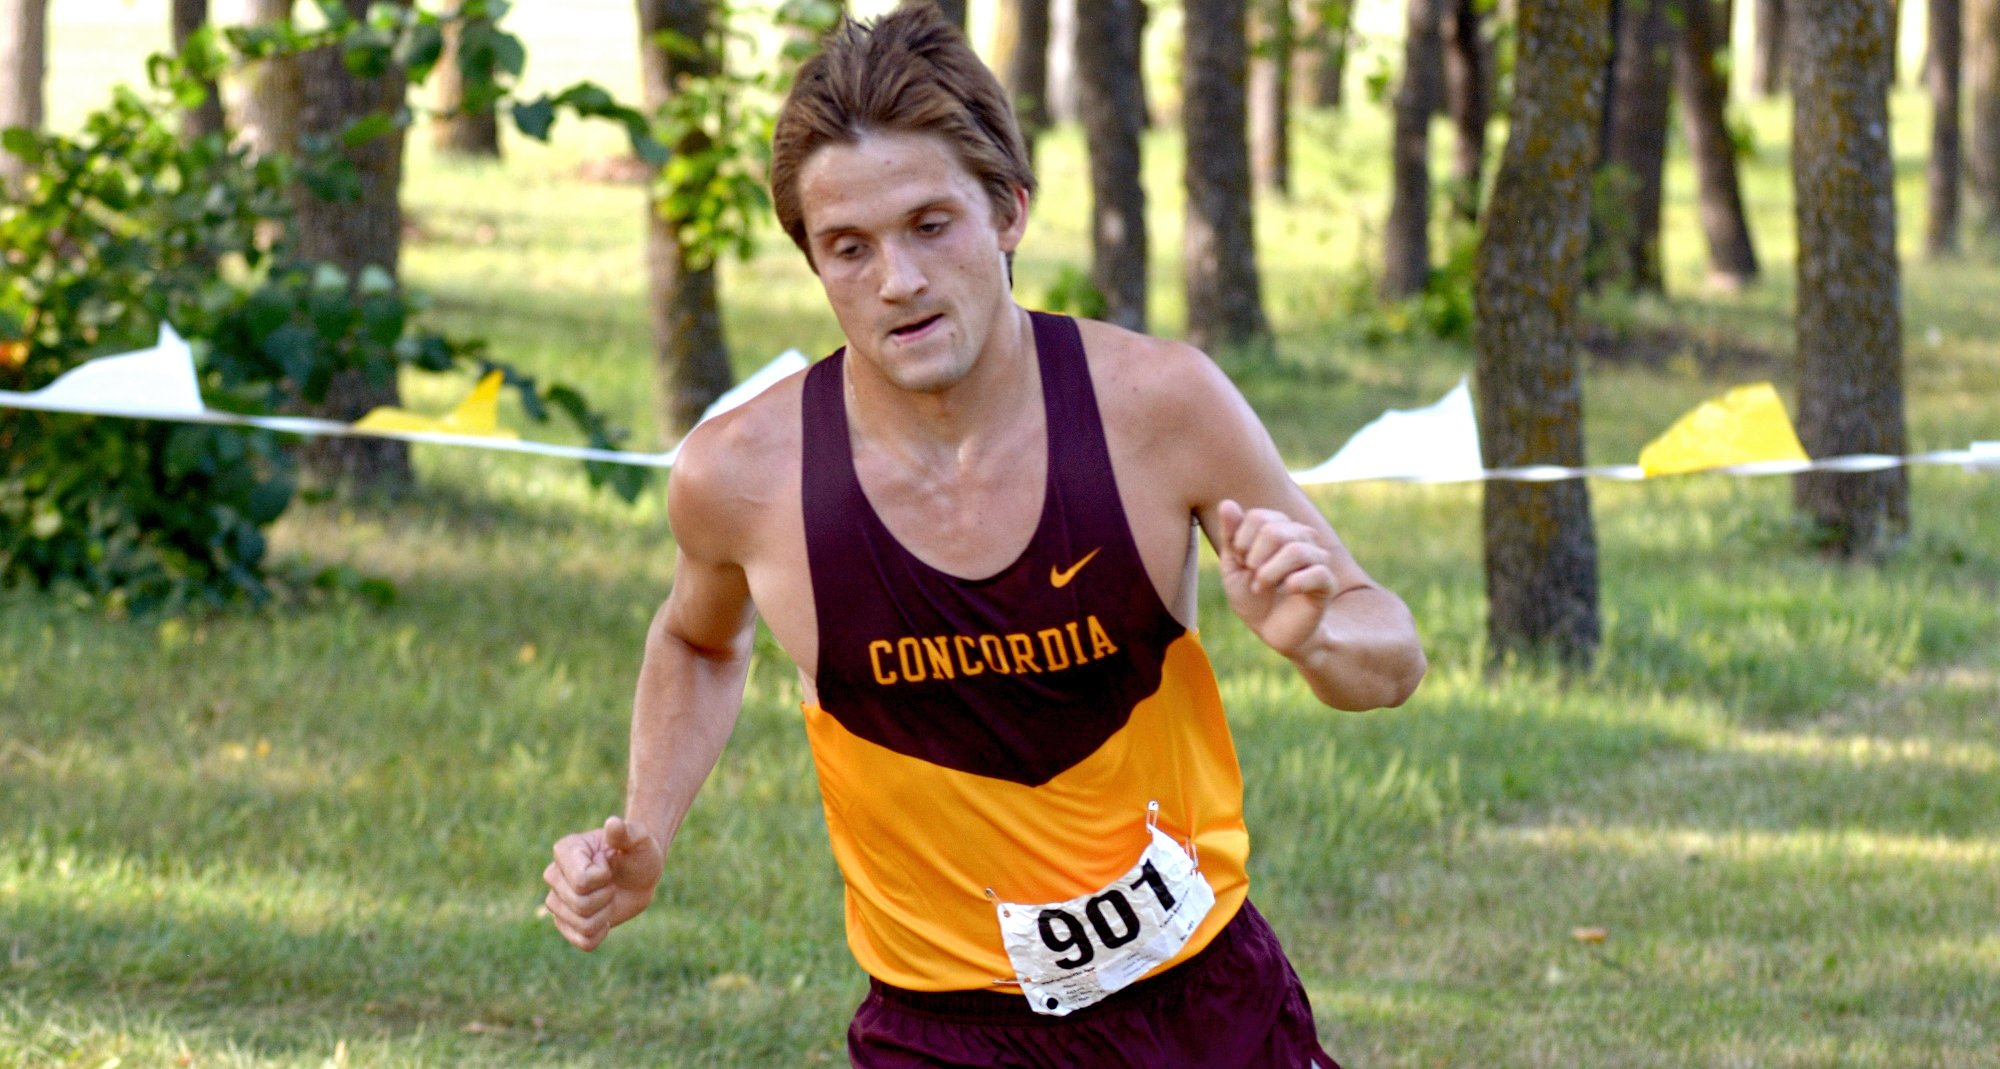 Junior Brandon Quibell led the Cobbers at the St. Olaf Invite. He has led the team in both meets he has participated in this season.